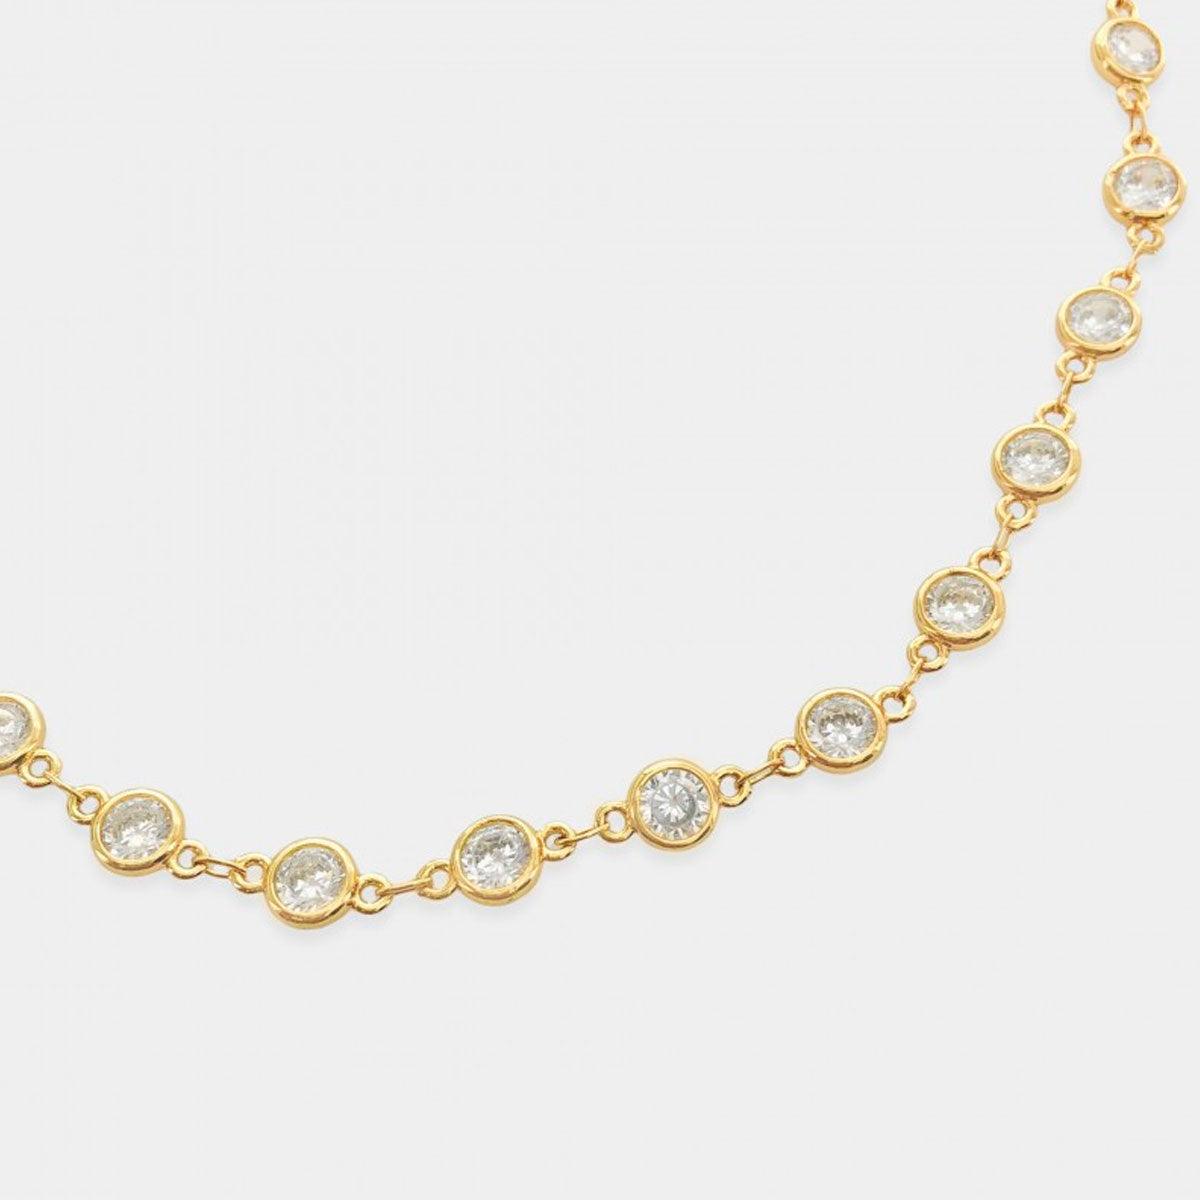 OMG BLINGS - 8mm Cubic Zirconia Chain Necklace - Arktana - Jewelry